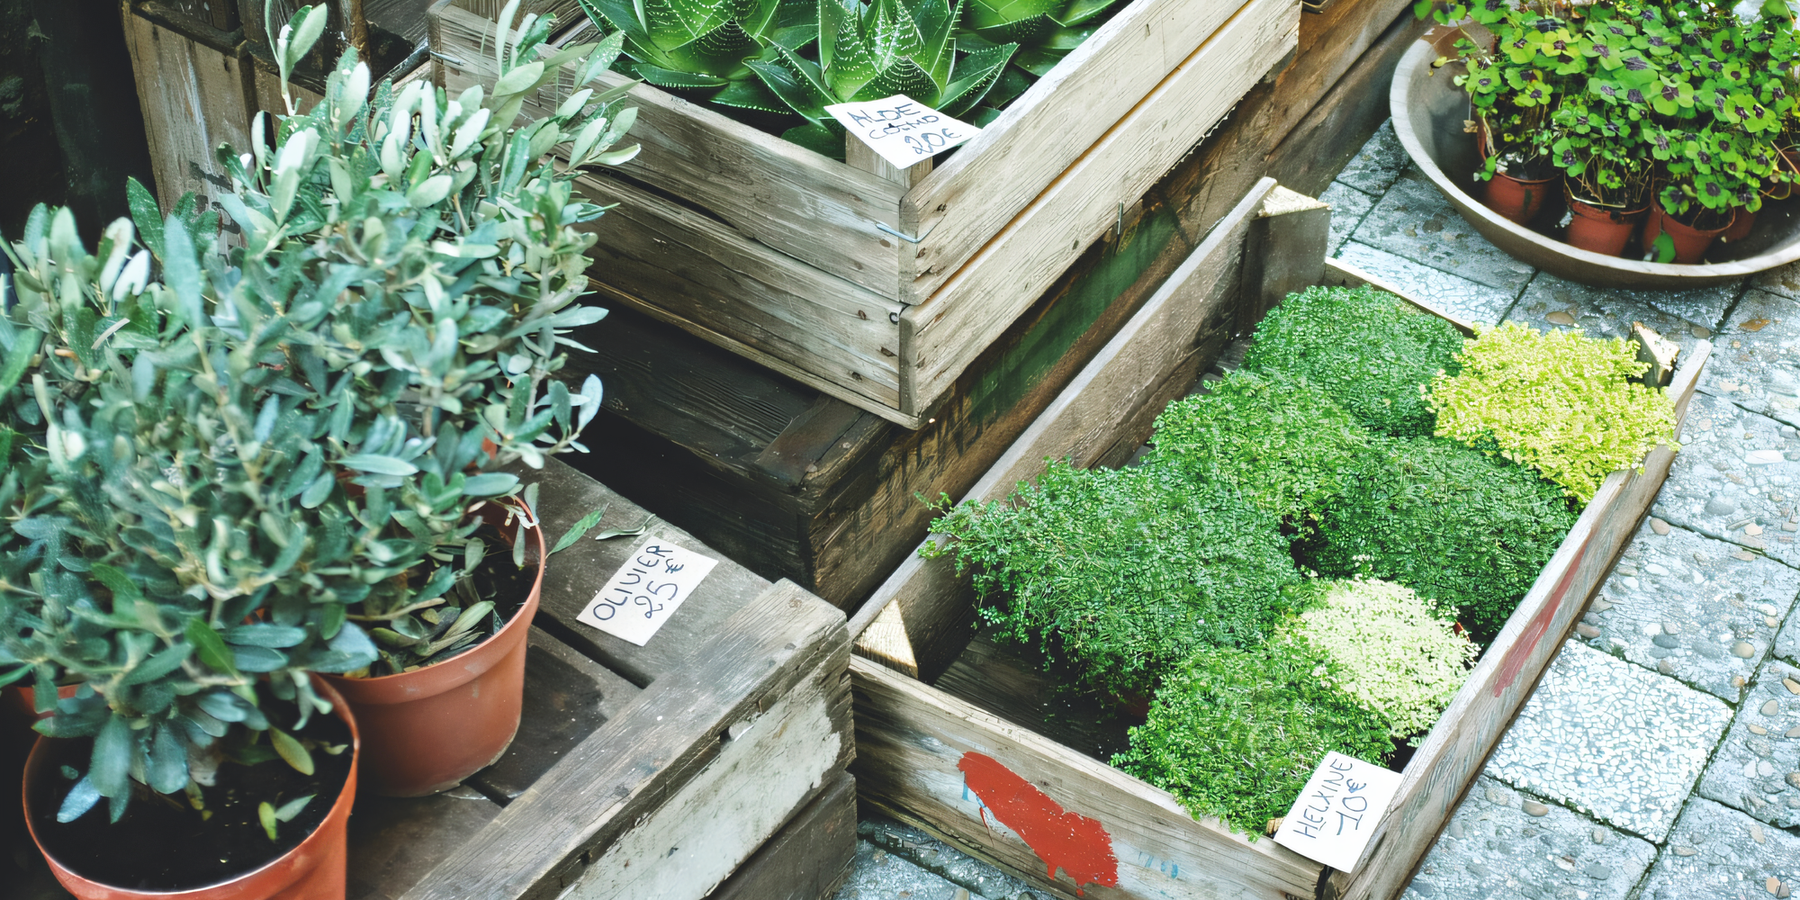 Infuse Life into Your Home with Garden Essentials